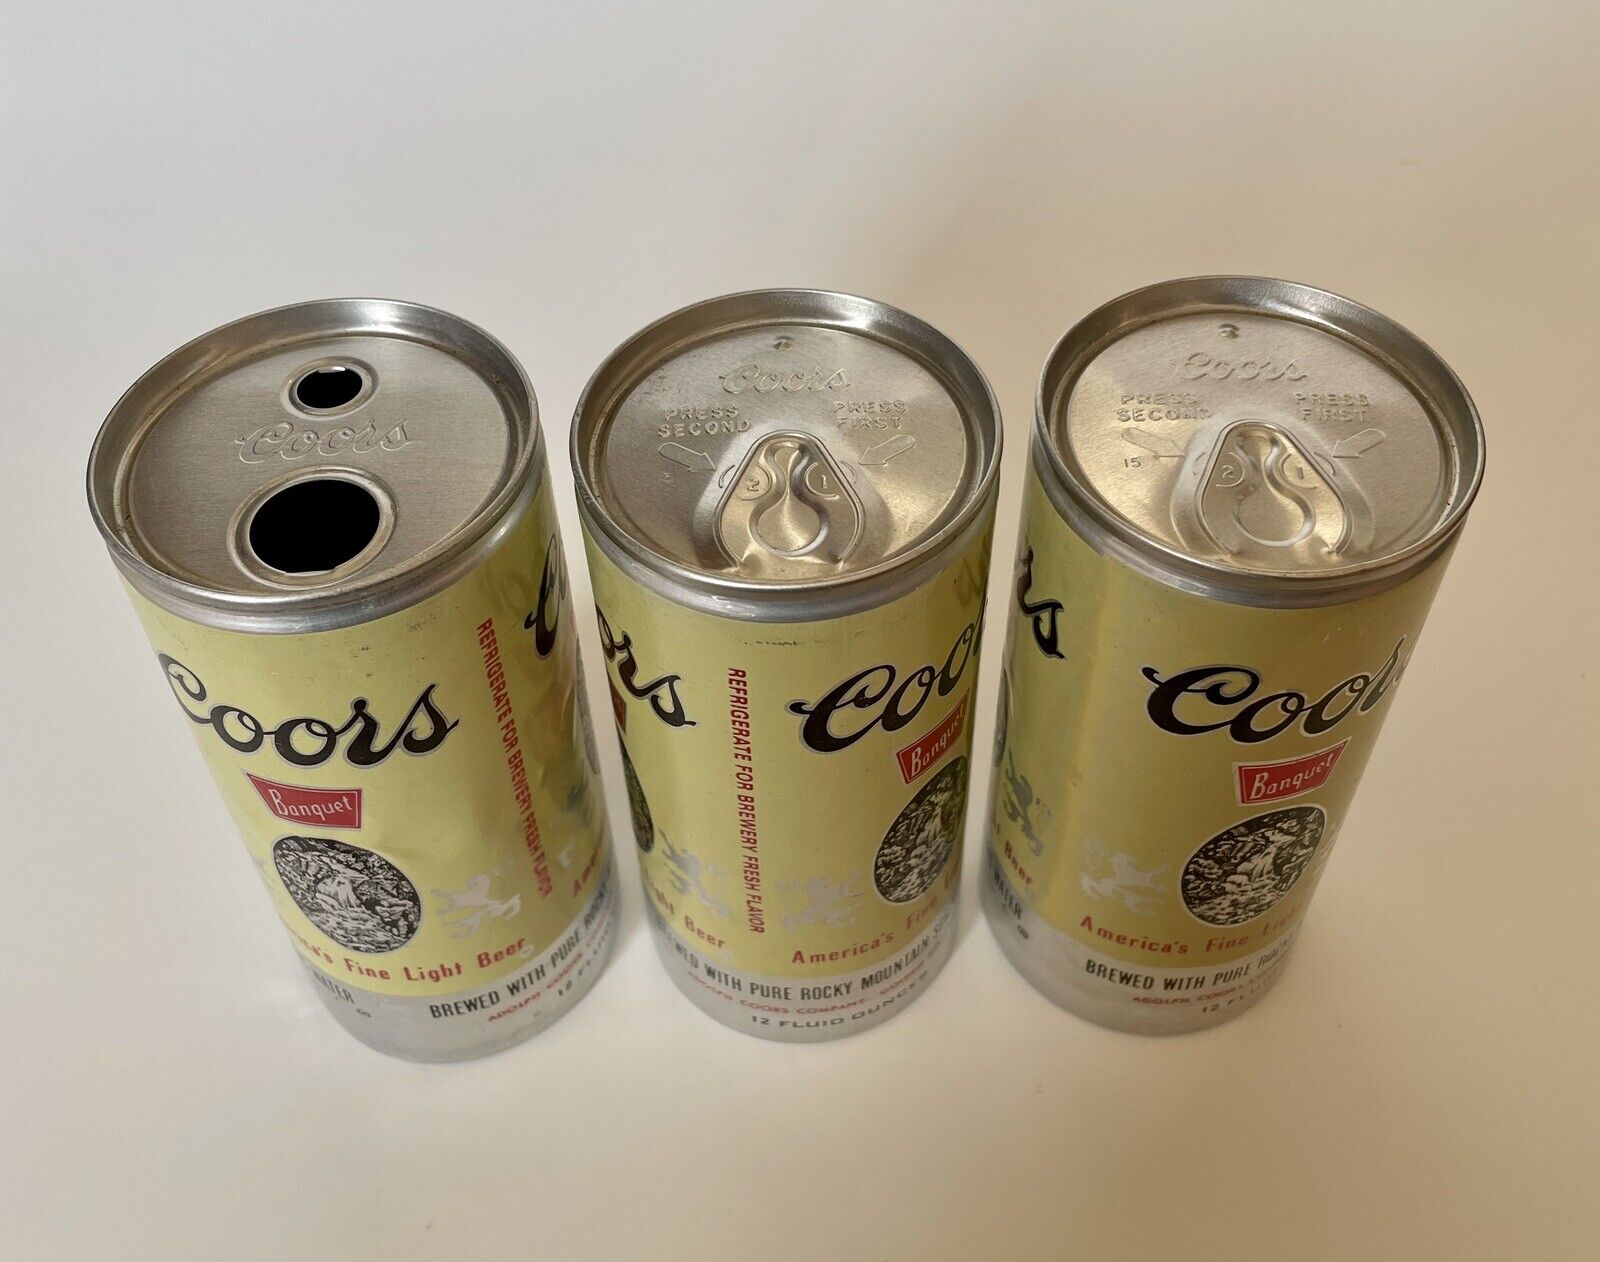 3 Vintage 1970s Coors Banquet 12oz Aluminium Beer Cans 2 Style Push Tops